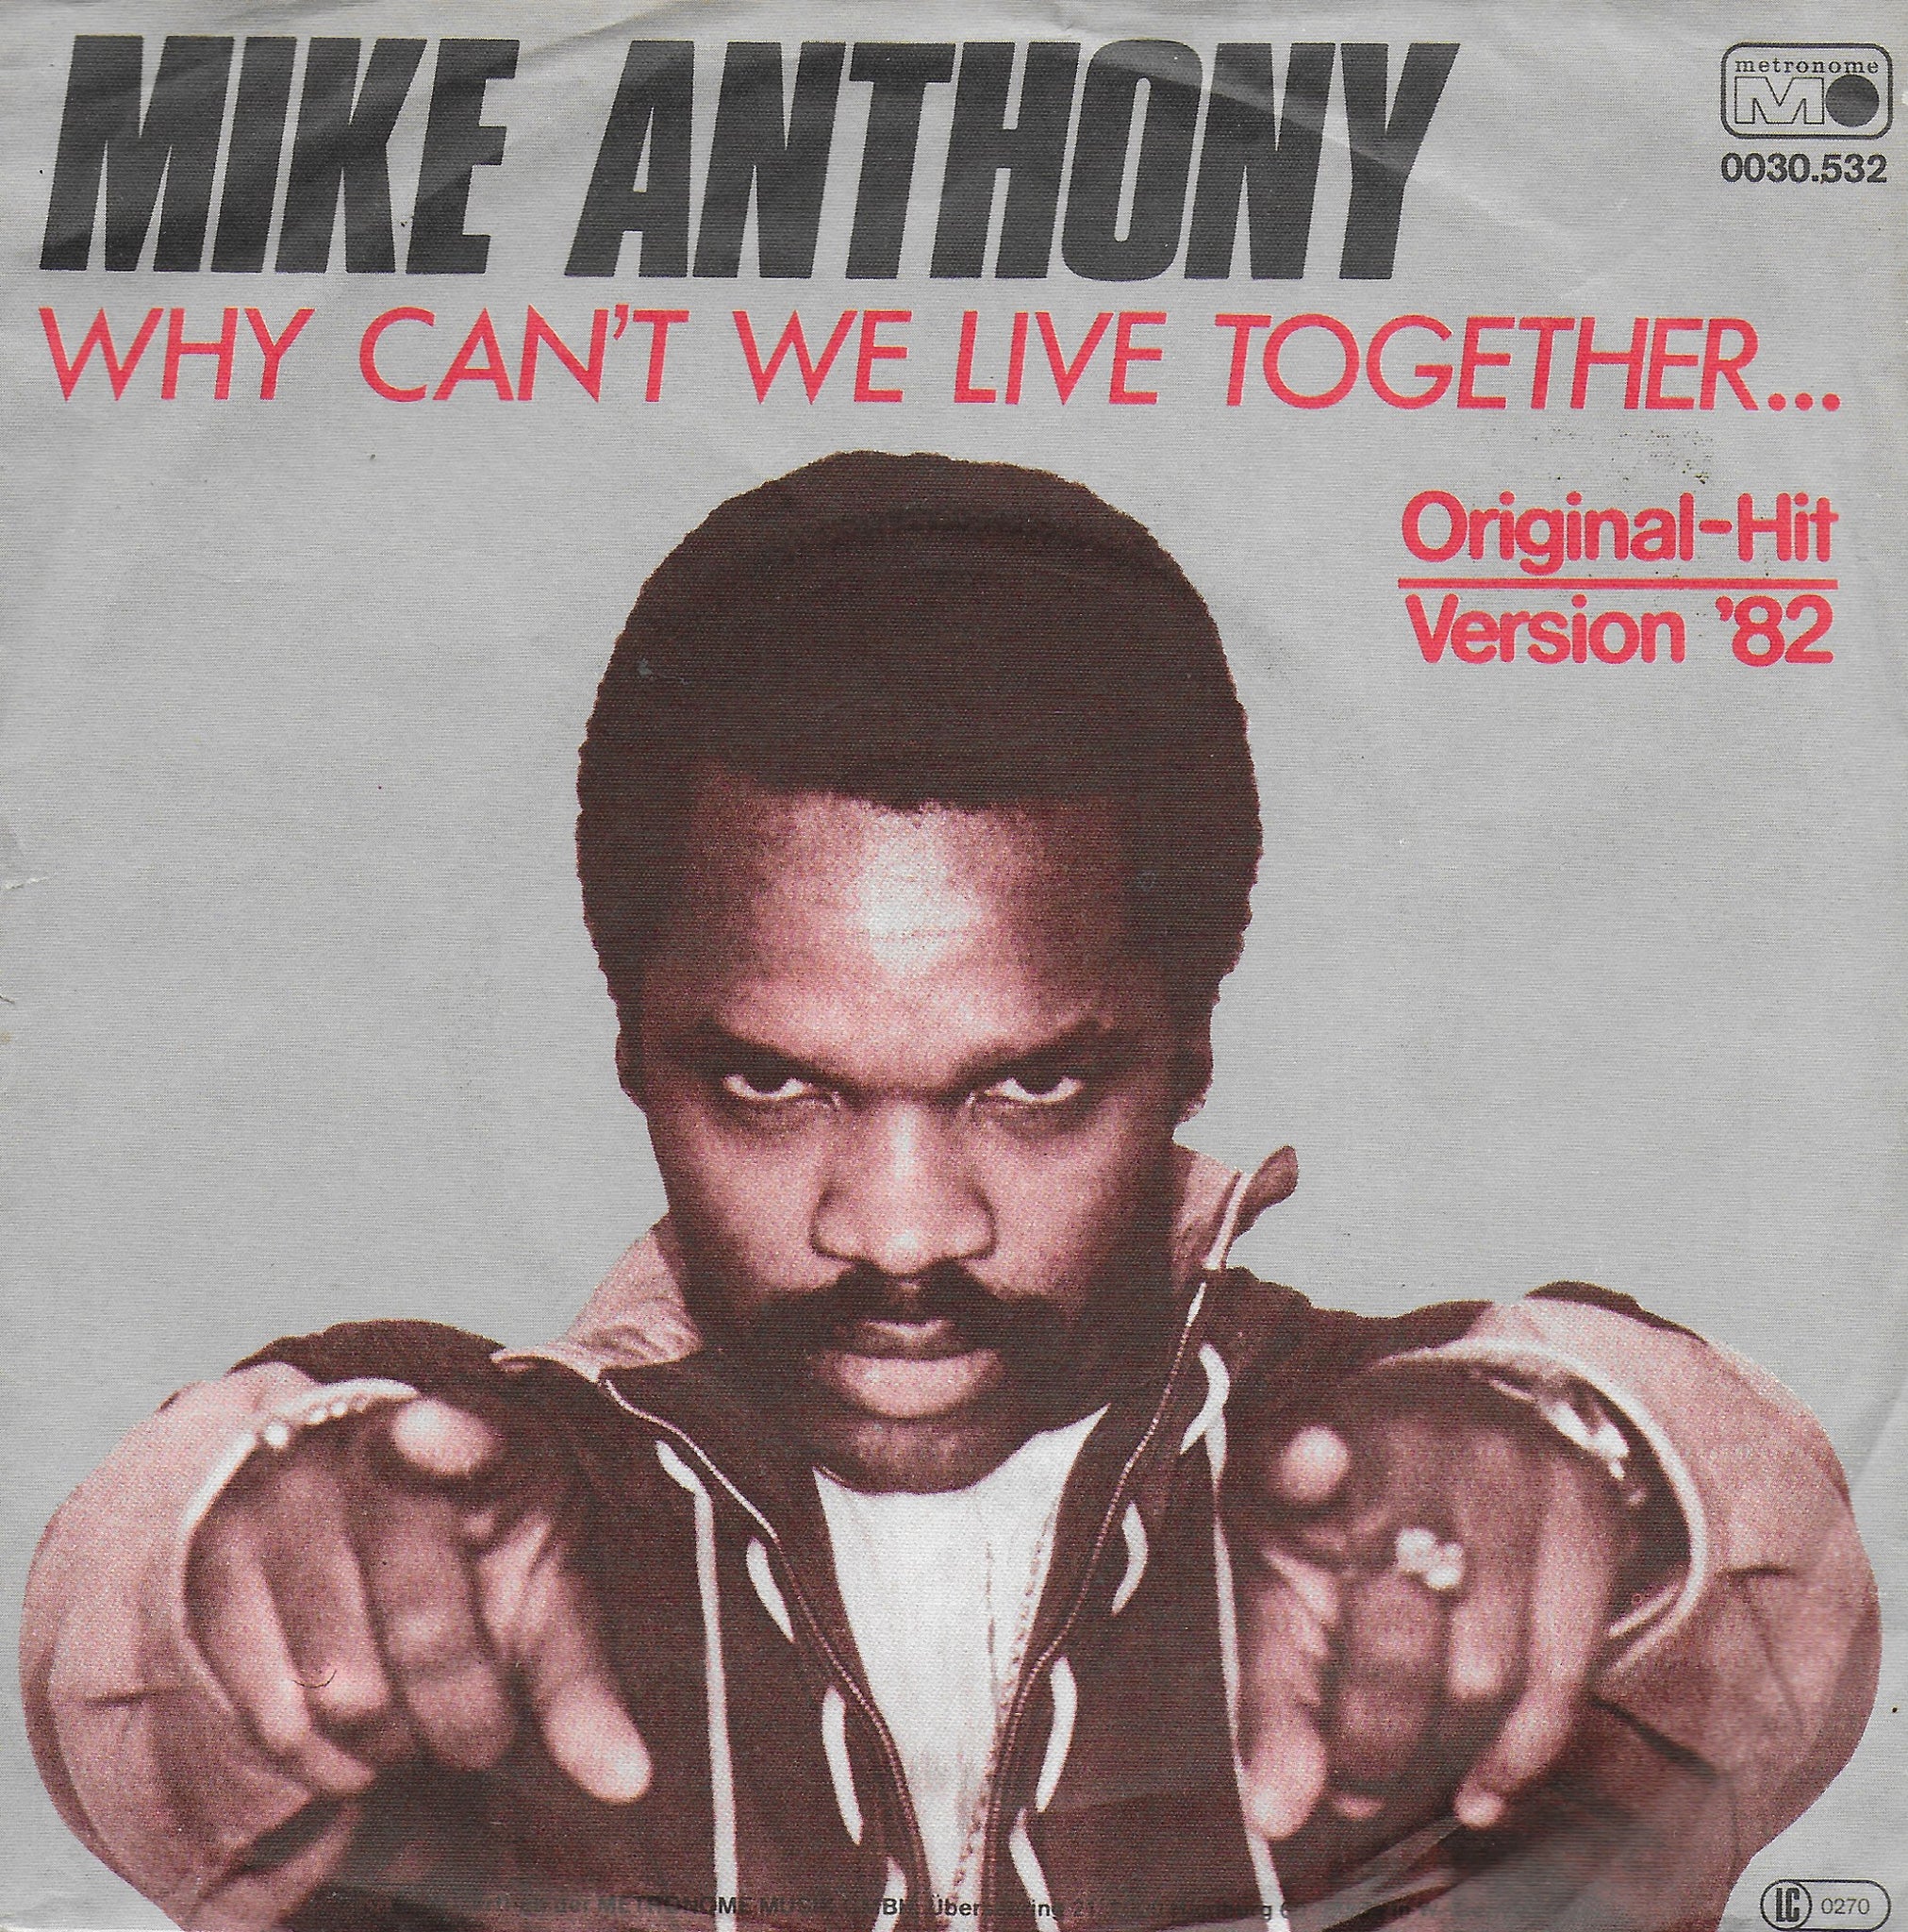 Mike Anthony - Why can't we live together (Duitse uitgave)